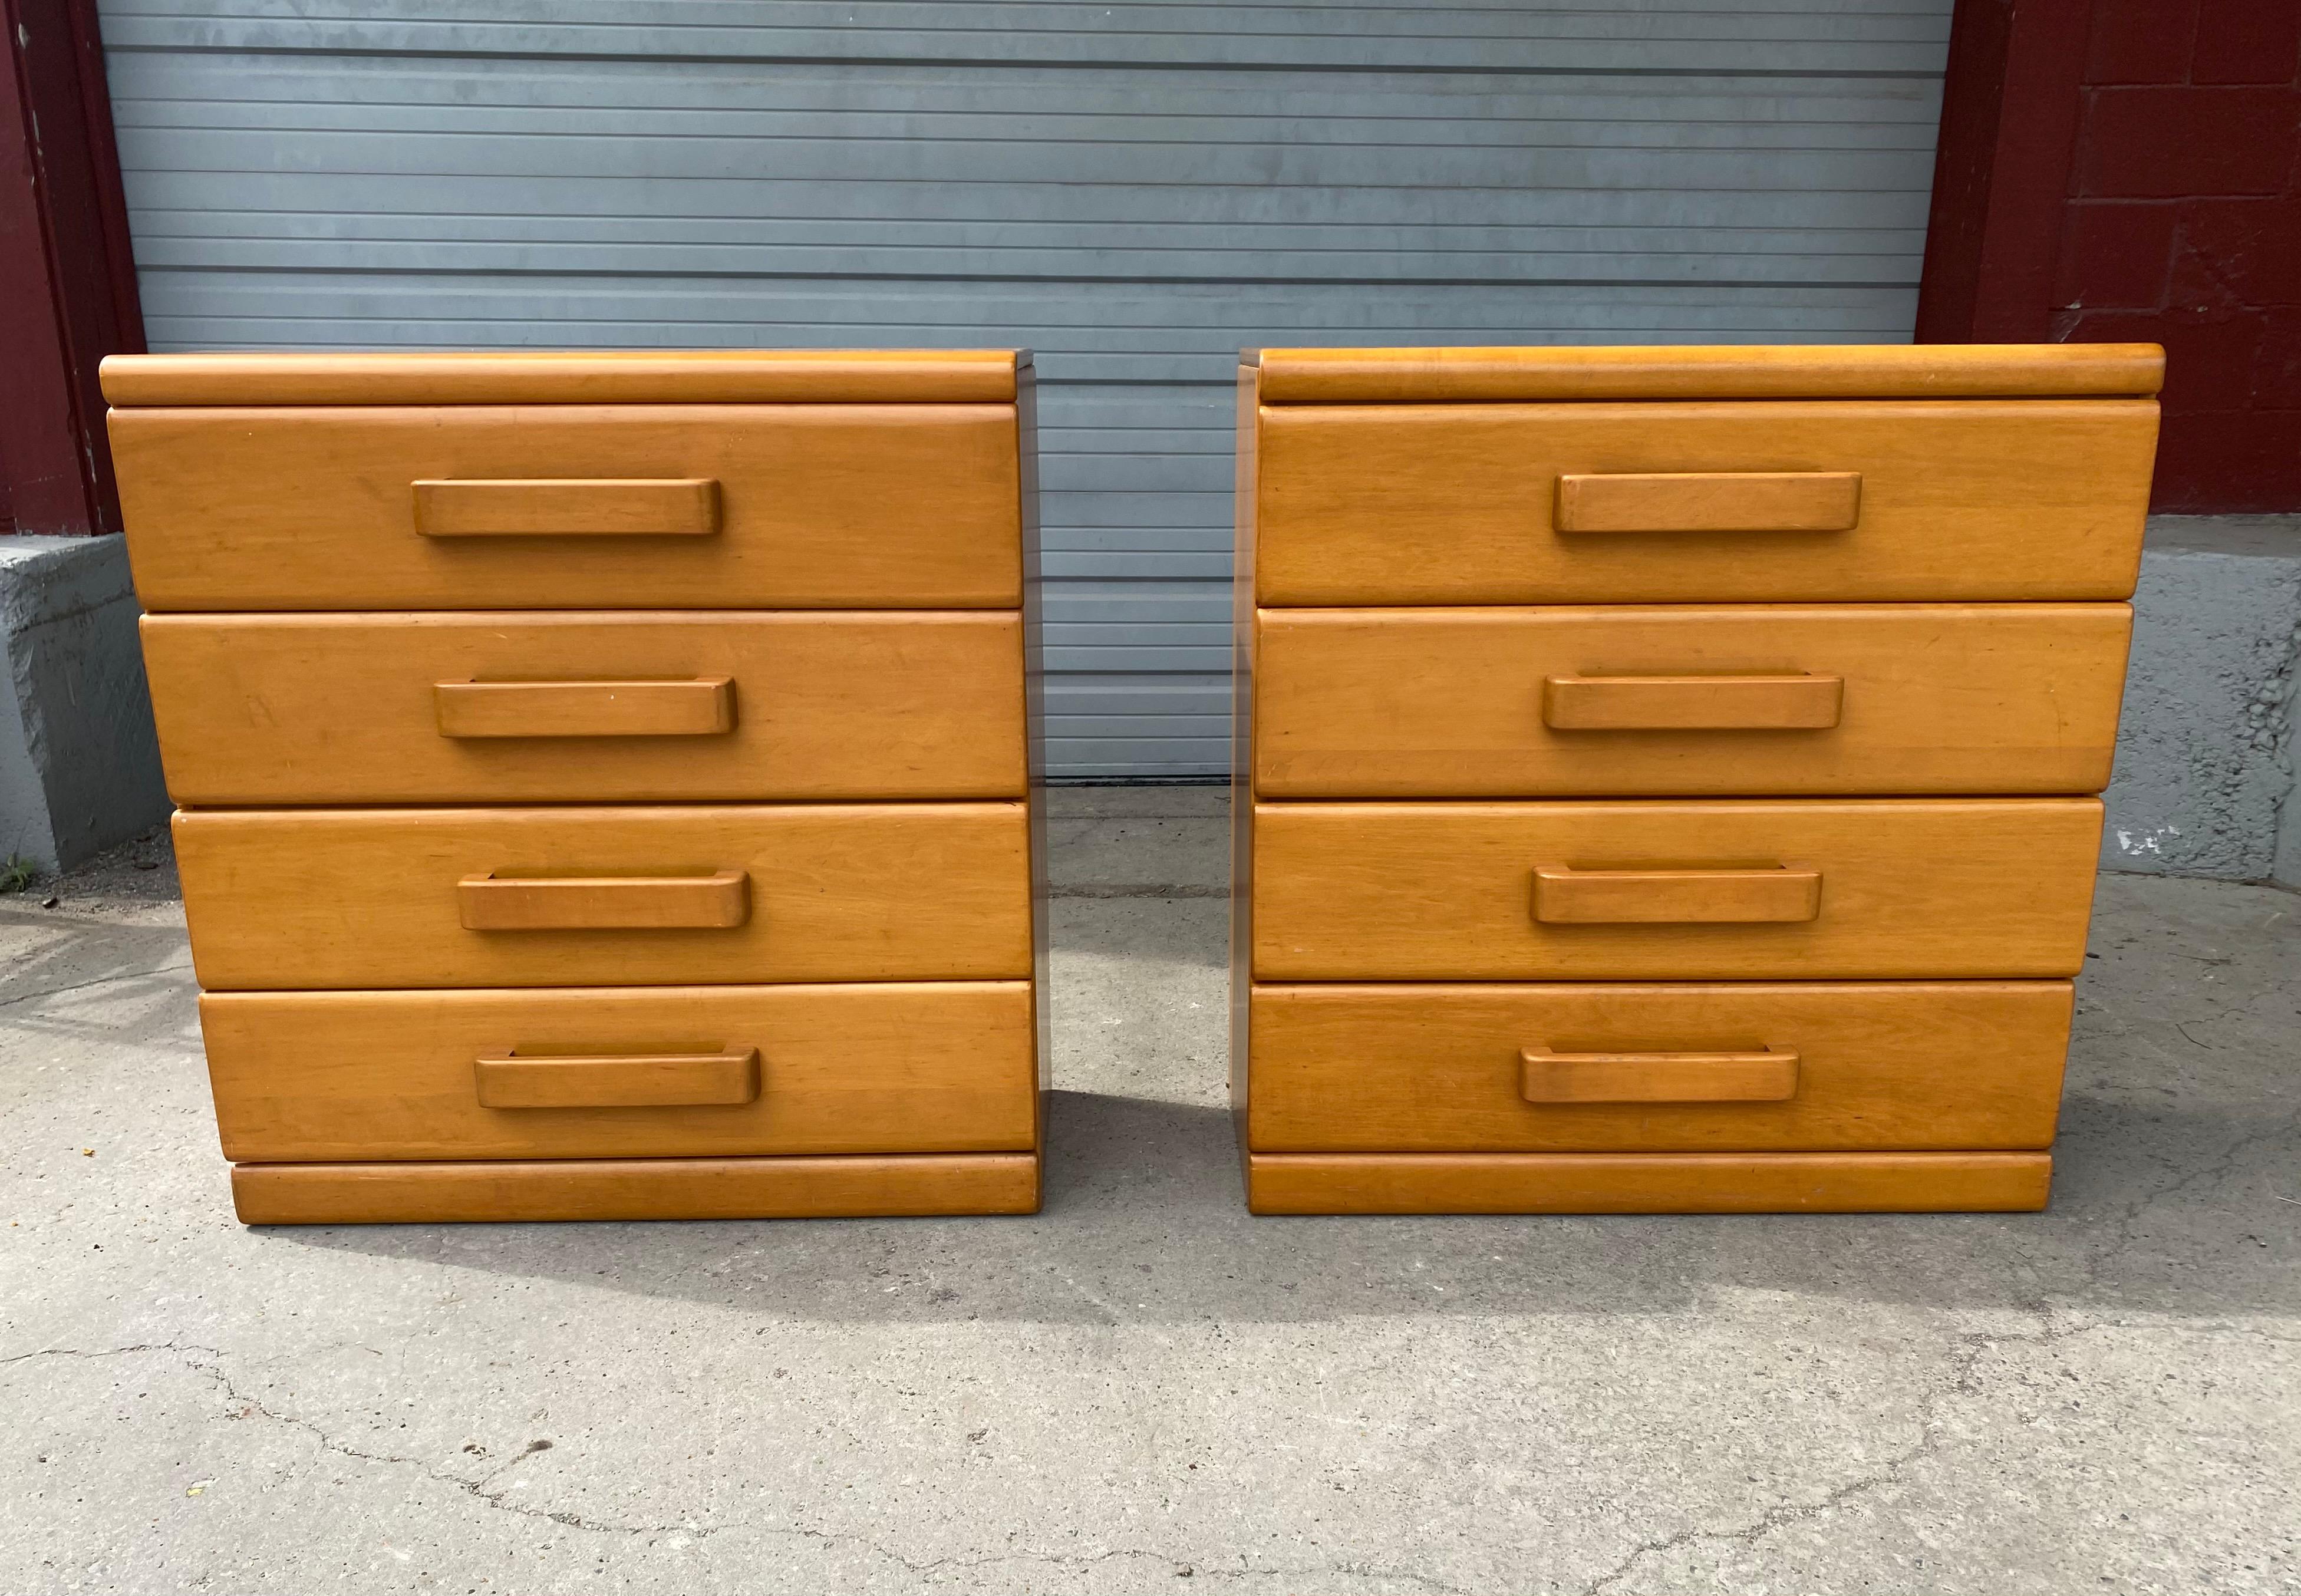 Great pair of matching 4 drawer chests designed by Russel Wright. American Modern /Conant Ball. Solid birch wood construction, stunning 1930s transitional design, from Art deco to Modern. Unusual design featuring smart pull out desk to one of the